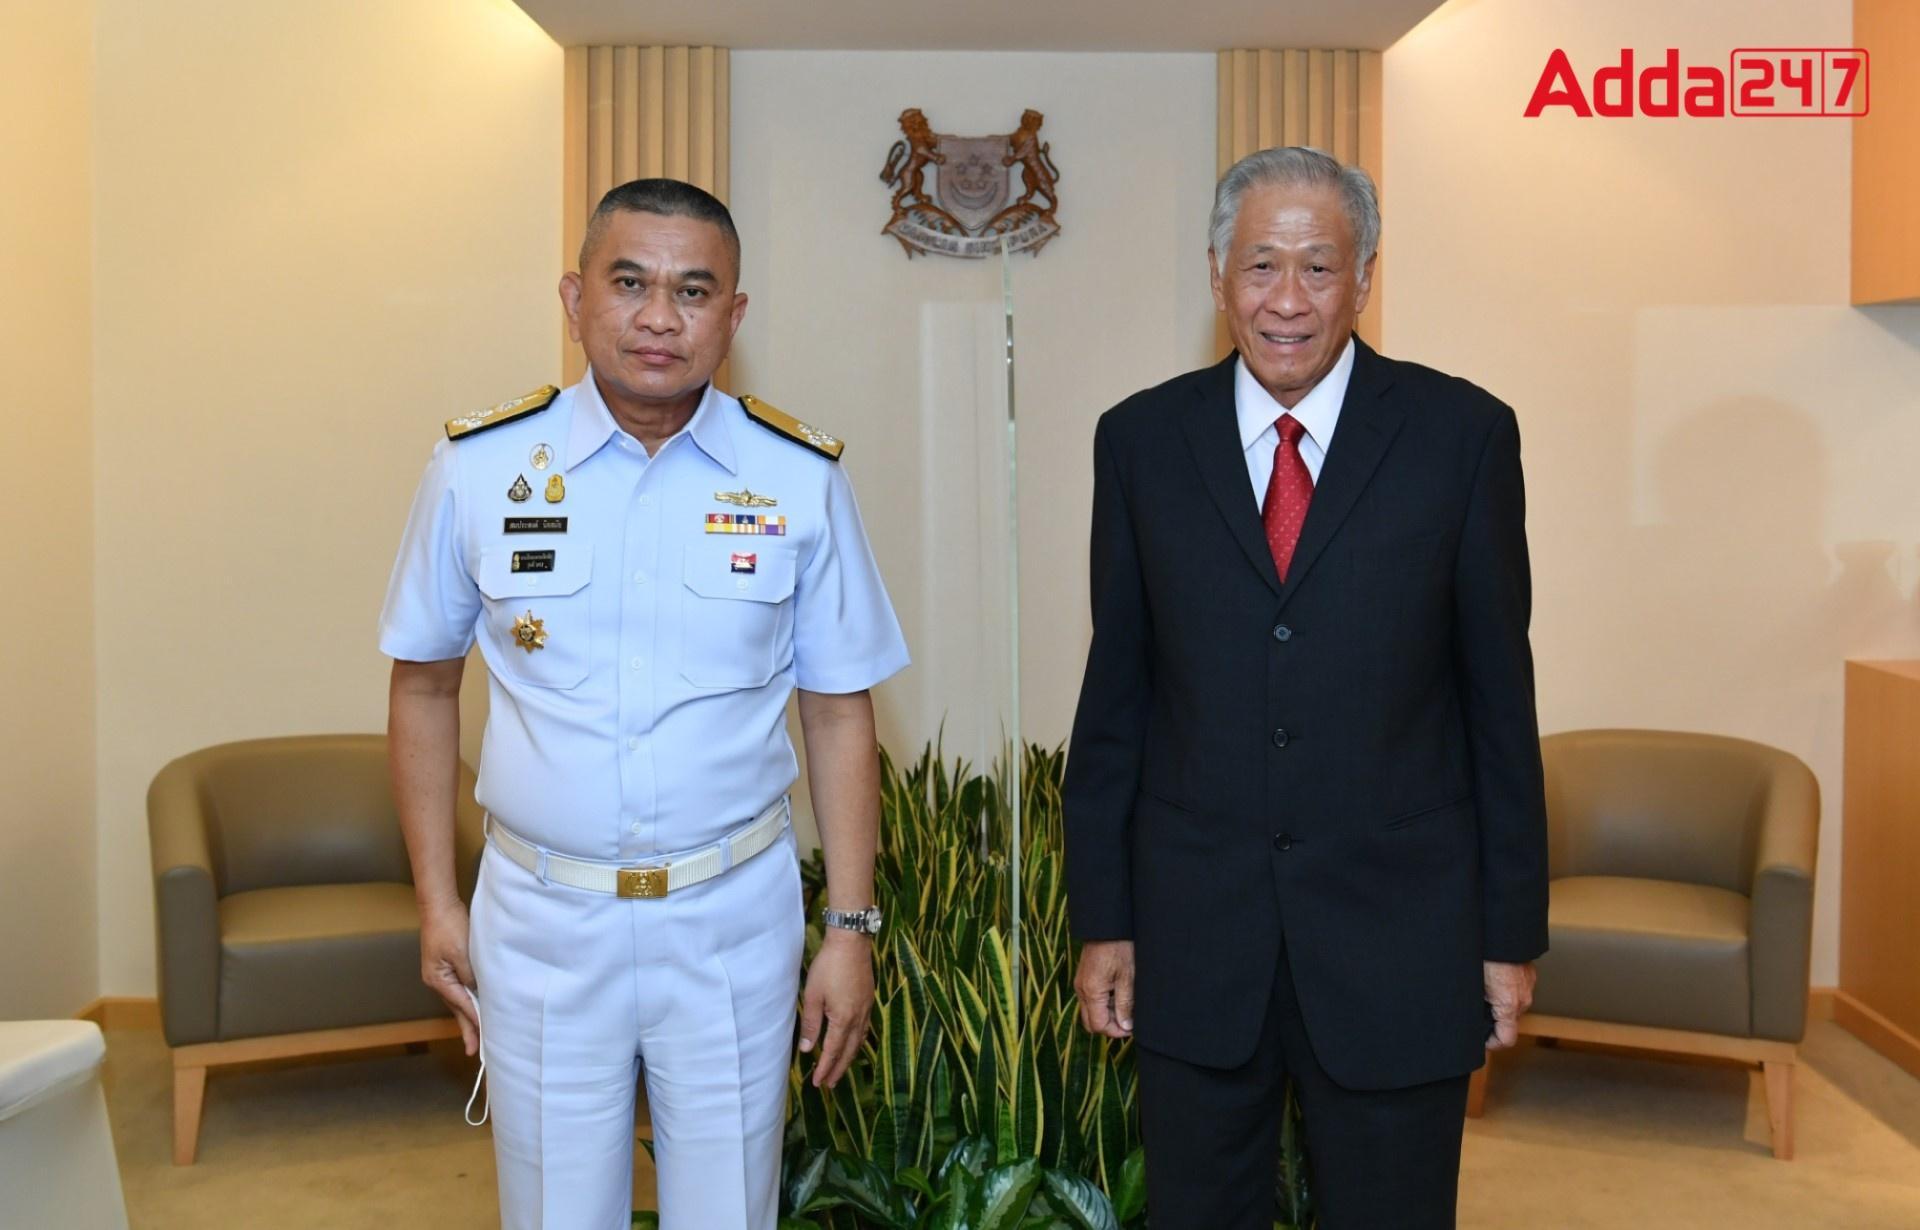 Singapore awarded 'Meritorious Service Medal' to Lamba, Former Navy Chief of India_40.1